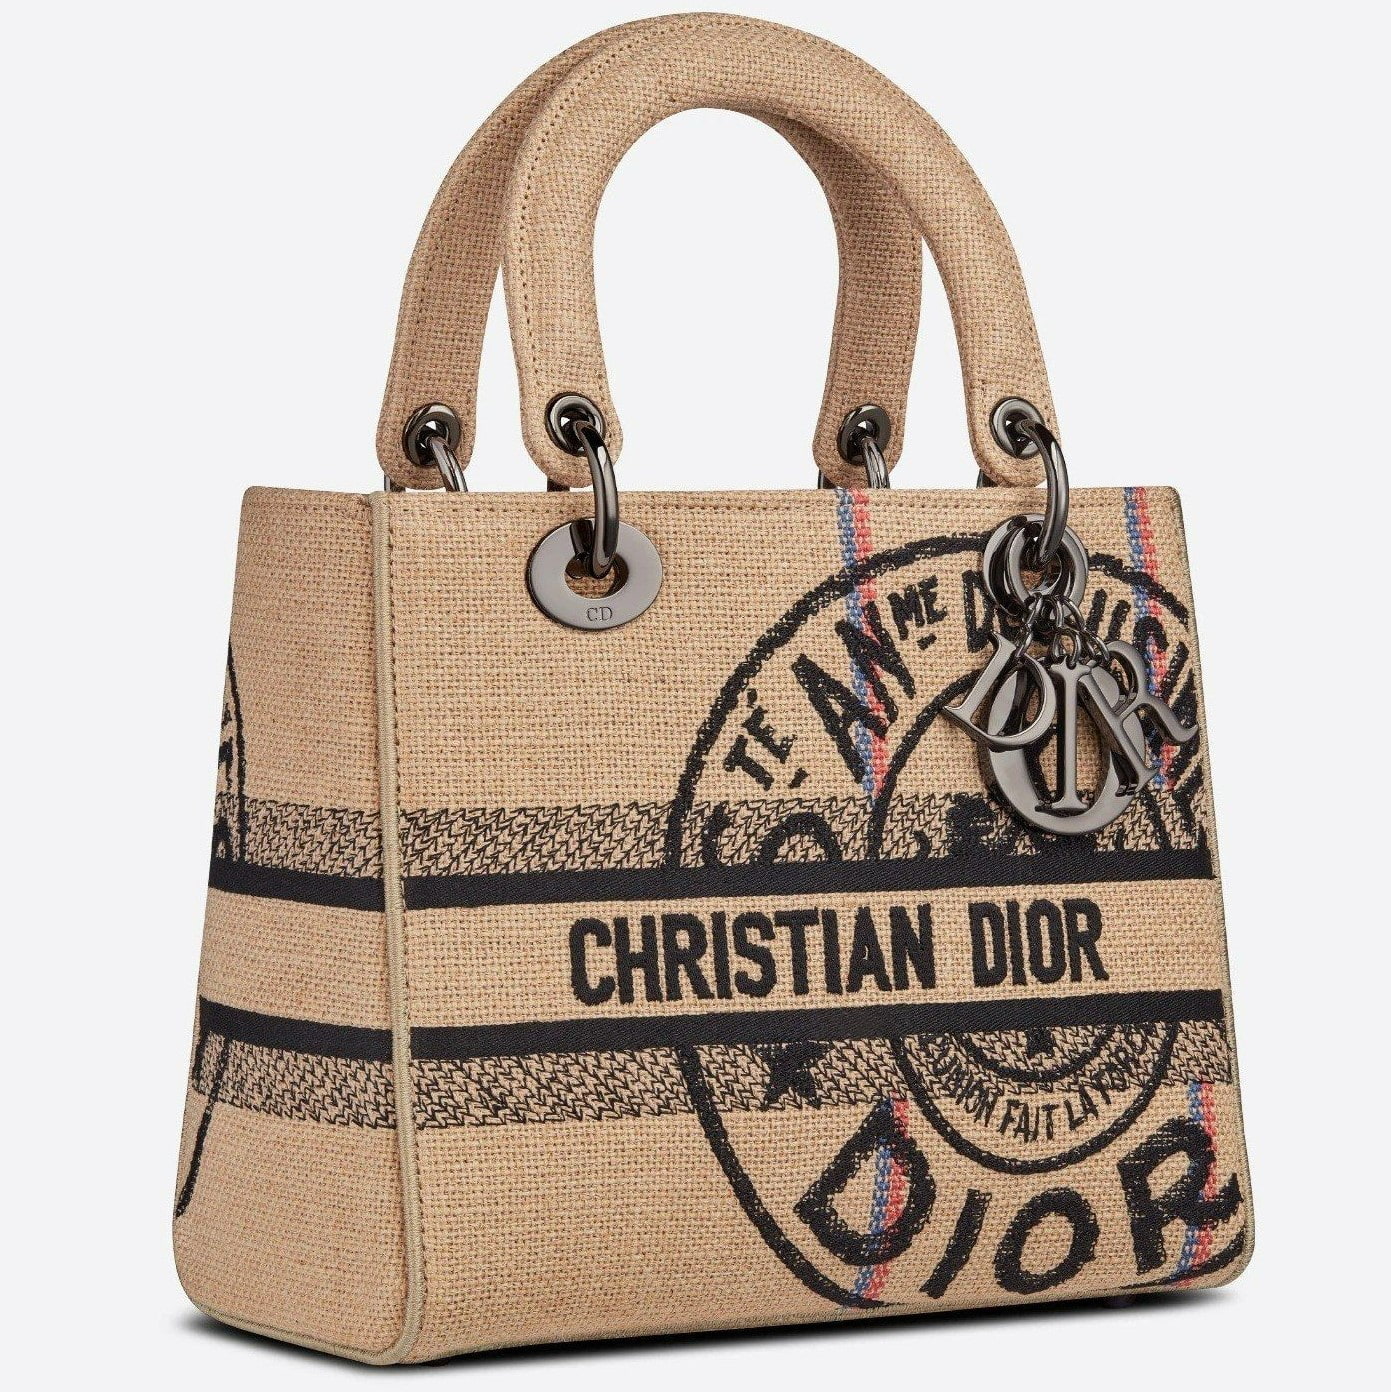 TÚI XÁCH NỮ ĐEO CHÉO DIOR LADY BEIGE JUTE CANVAS EMBROIDERED WITH DIOR UNION MOTIF 12